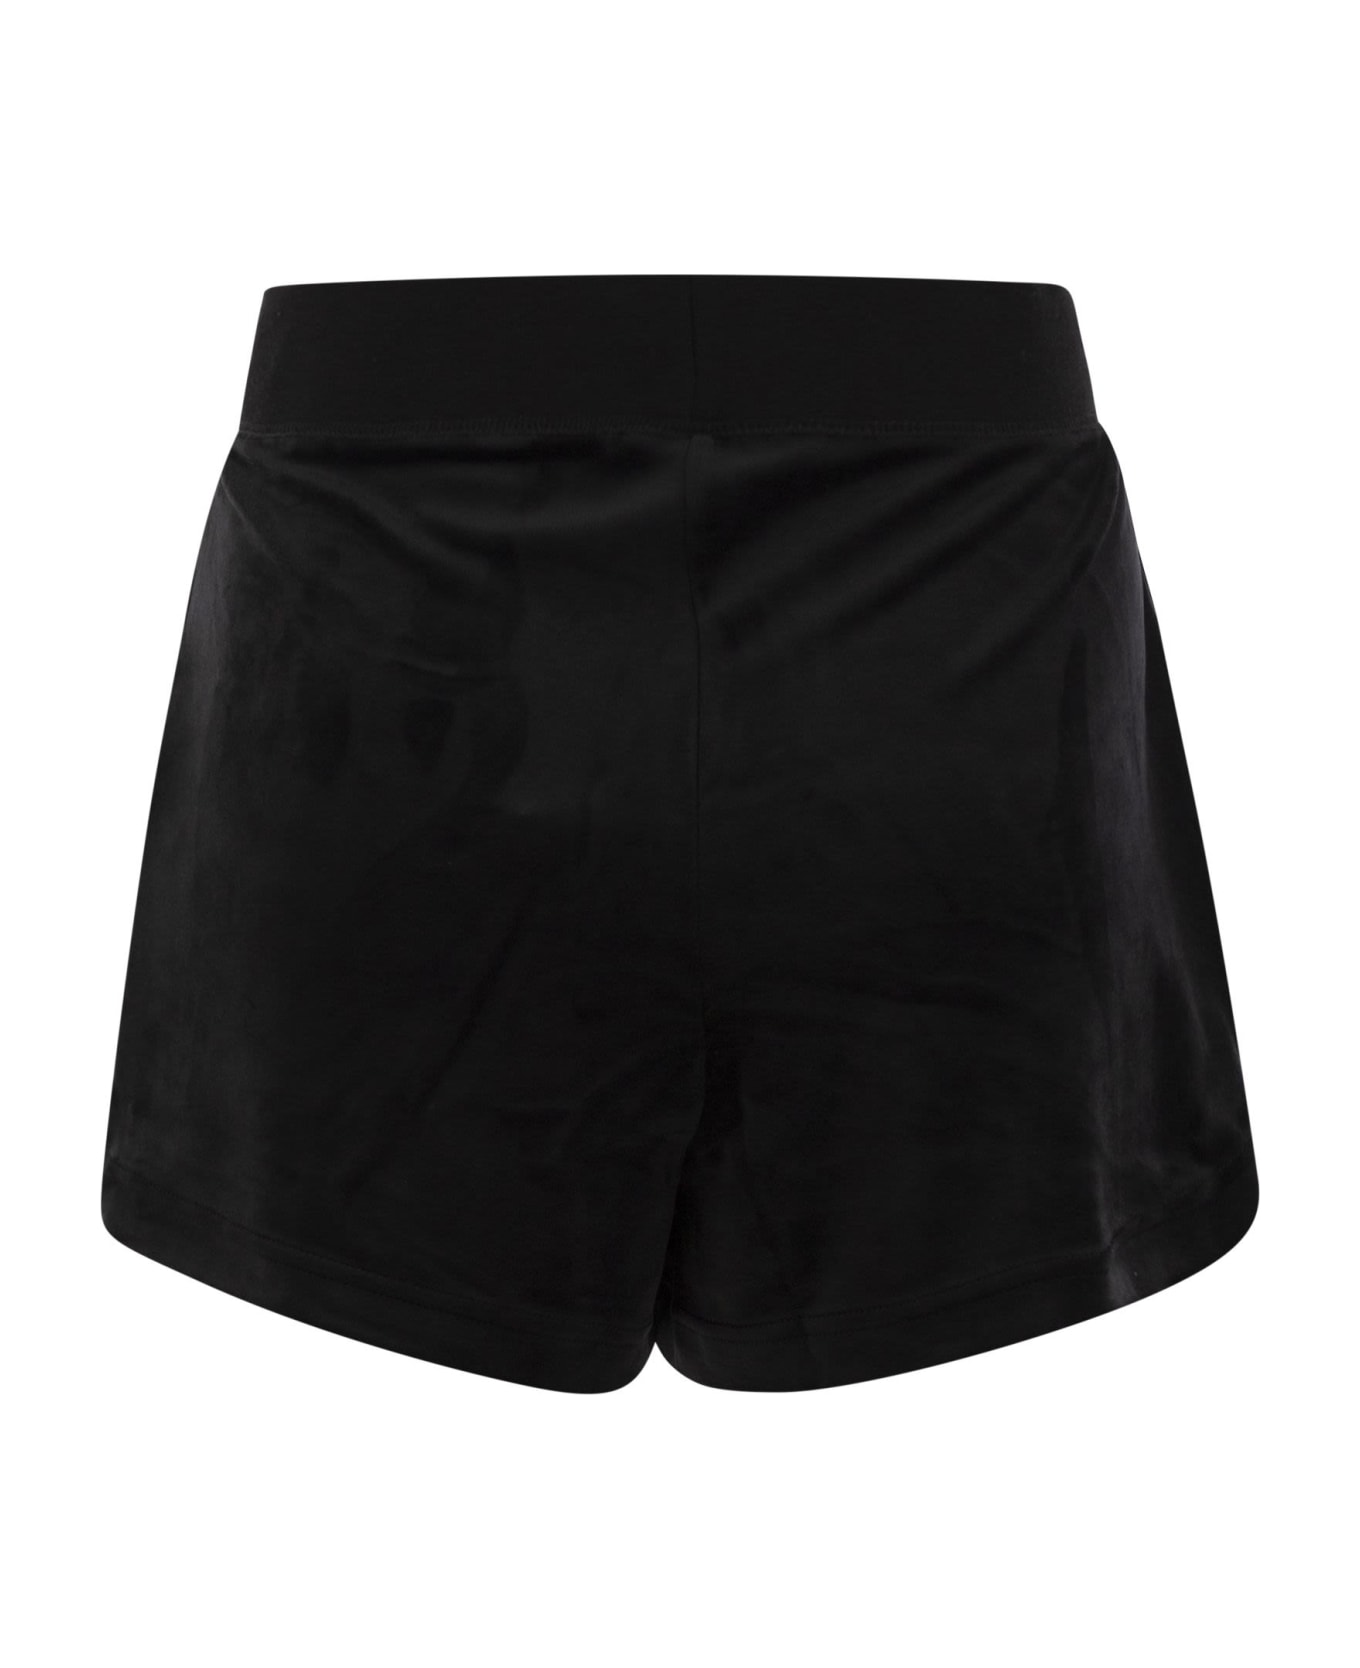 Juicy Couture Velour Shorts